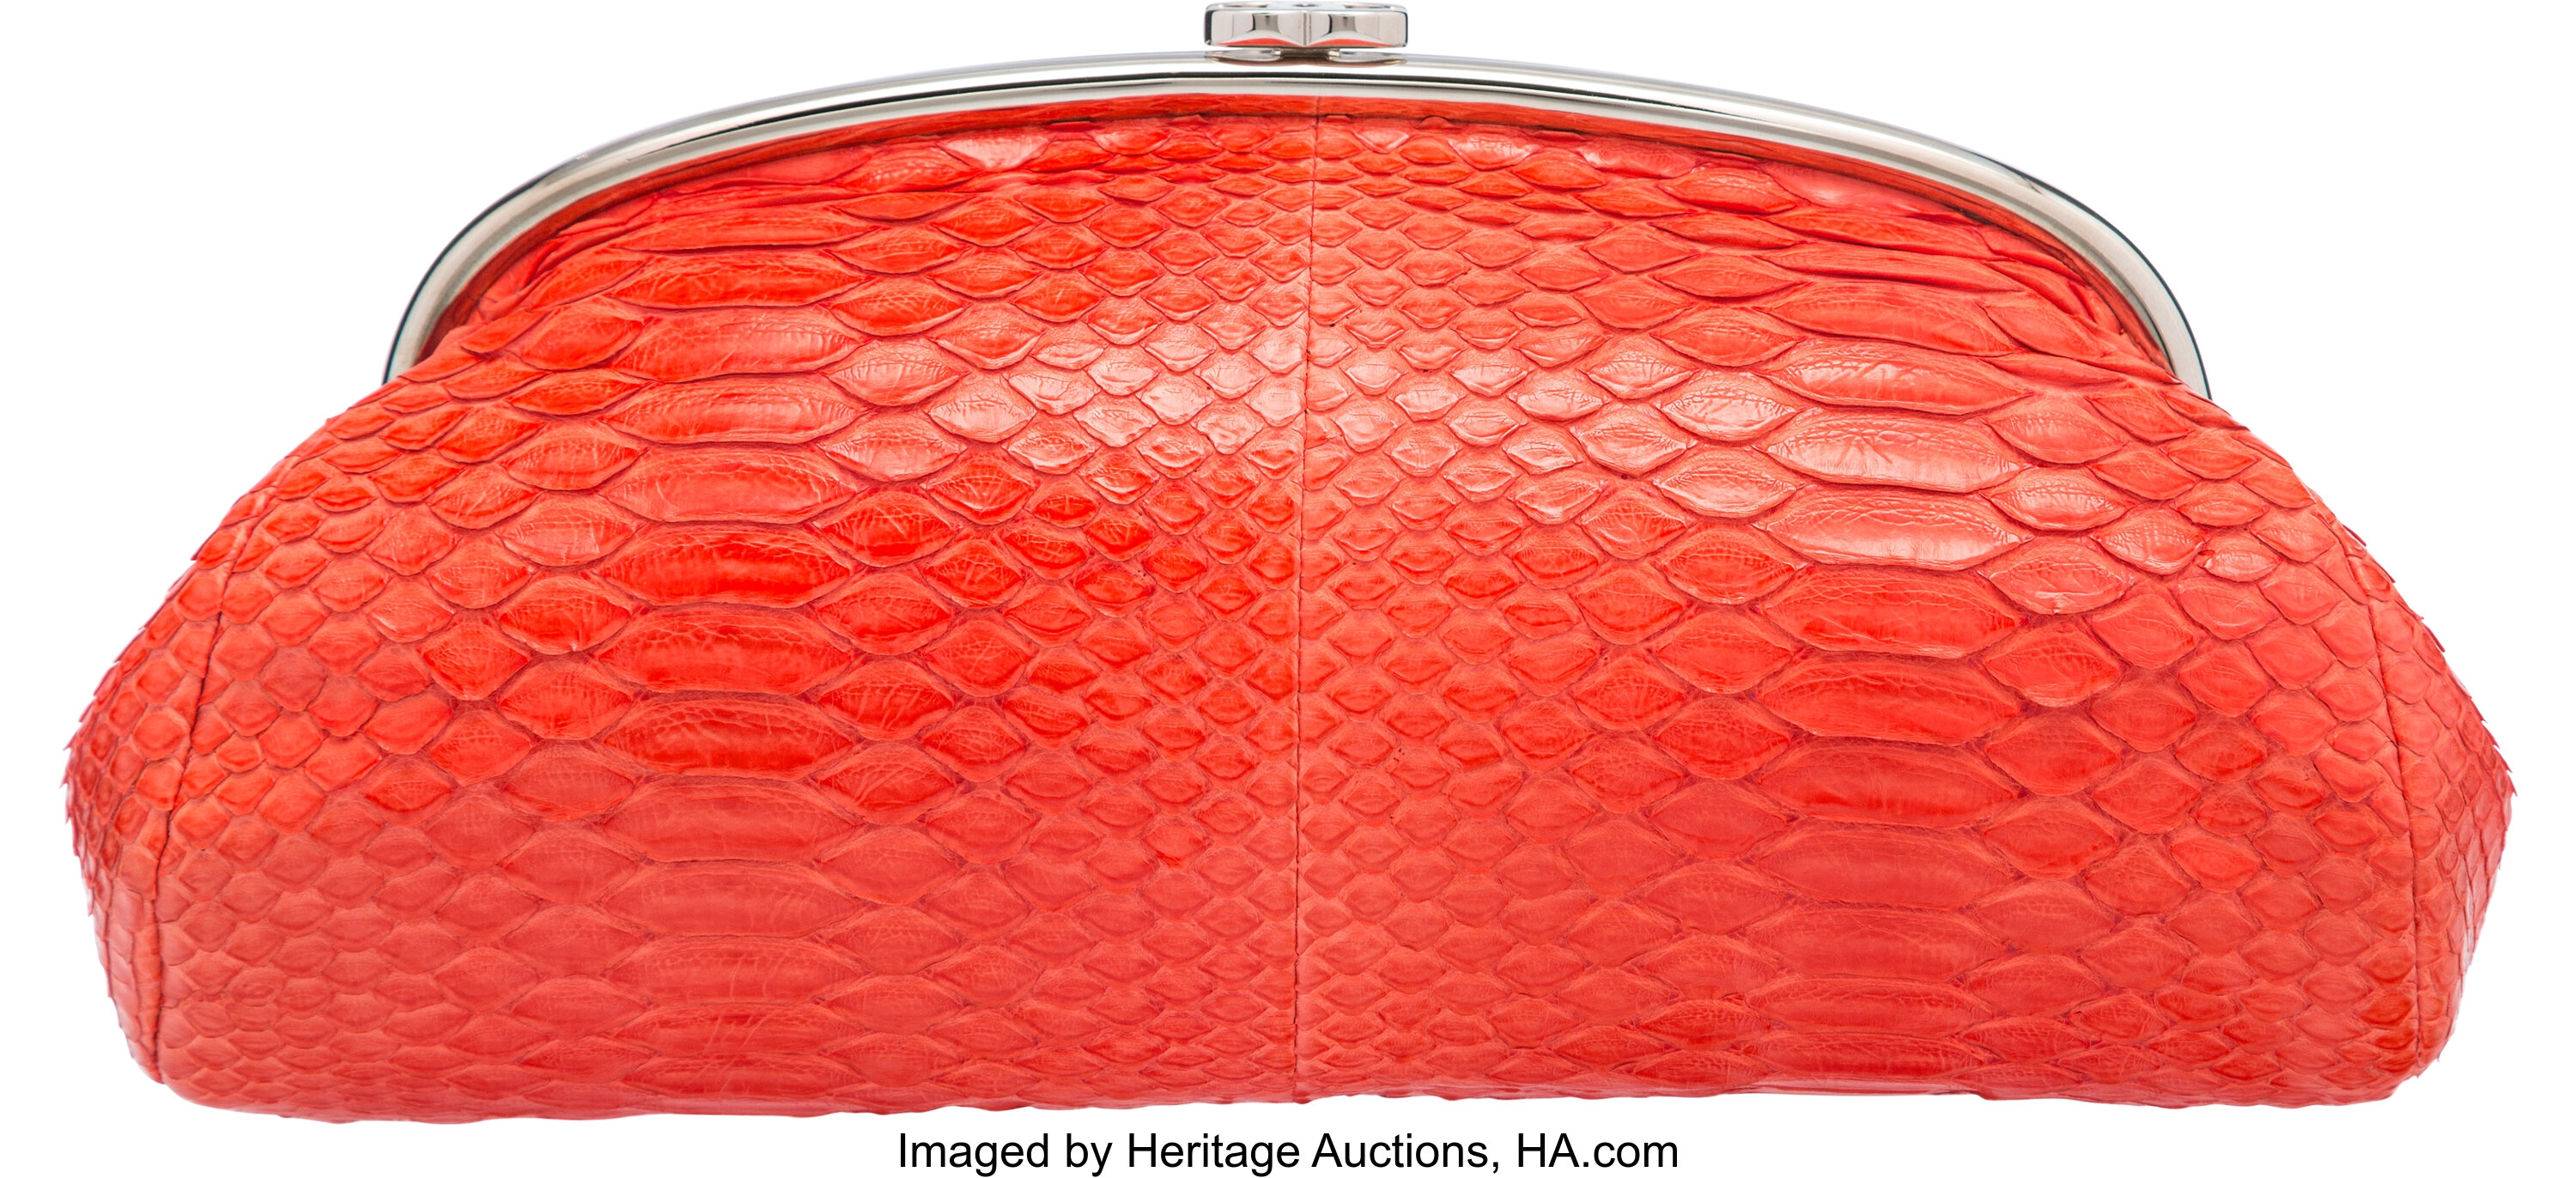 Chanel Orange Python Timeless Clutch Bag. Very Good Condition. 11, Lot  #58030